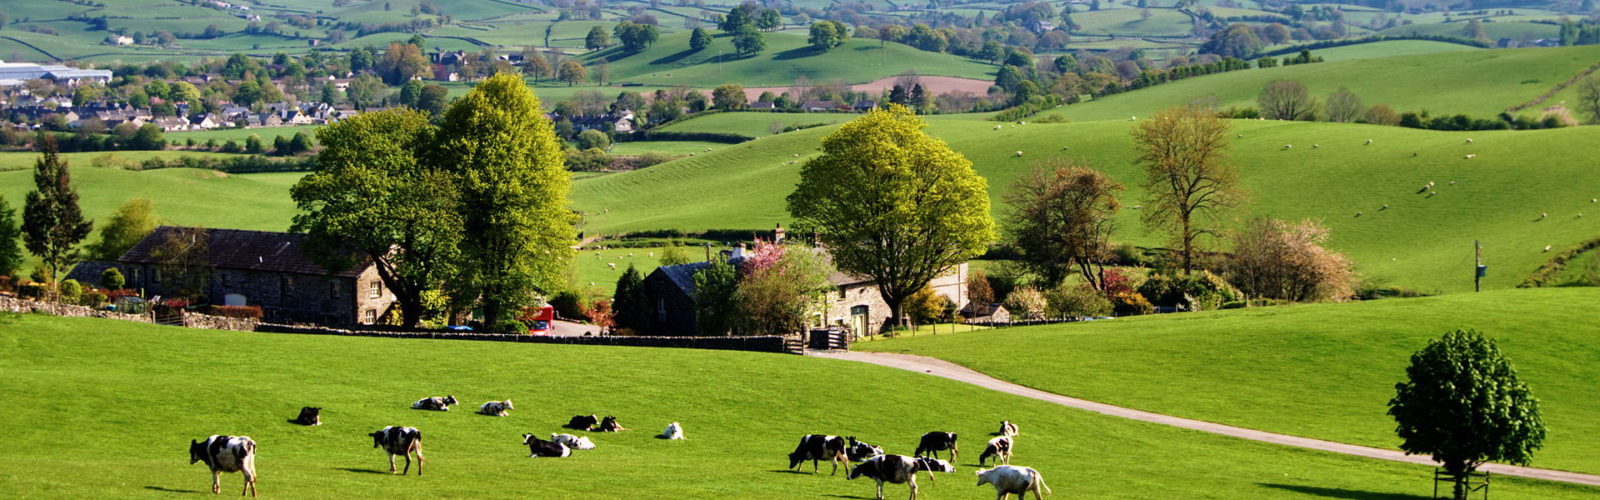 Rural landscape with a herd of cows grazing and rolling hills in the background